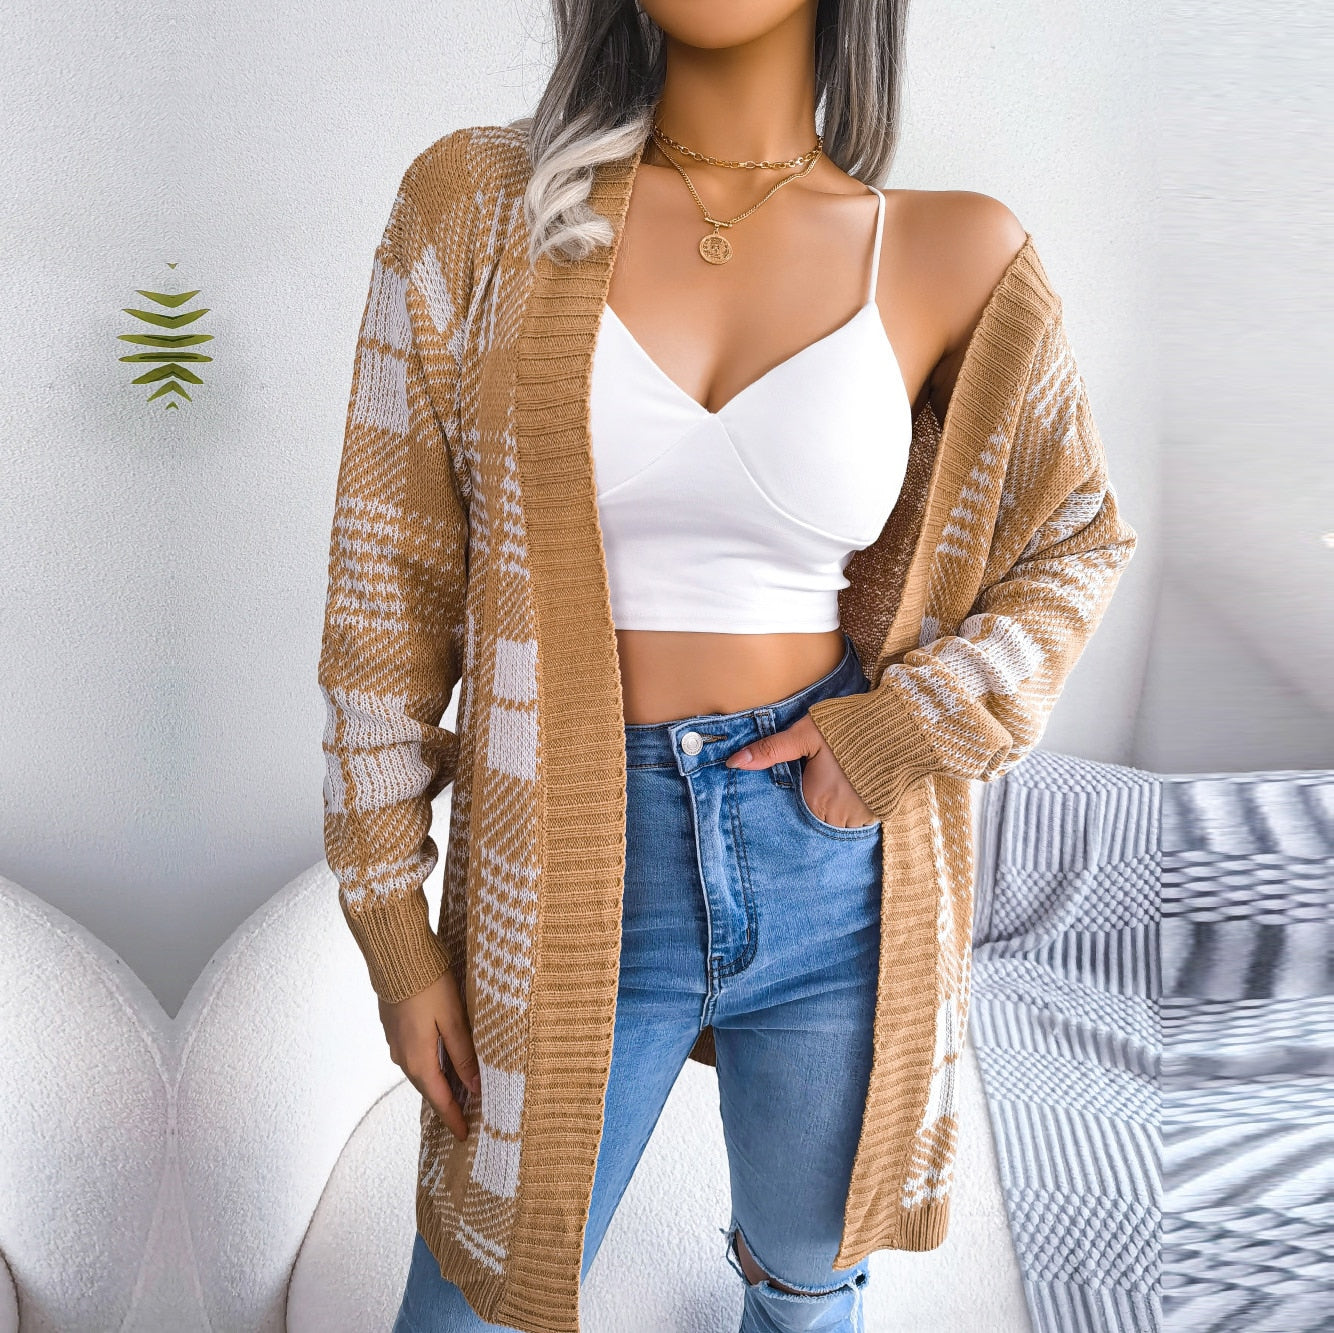 Lana - Beige Knitted Plaid Belted Cardigan